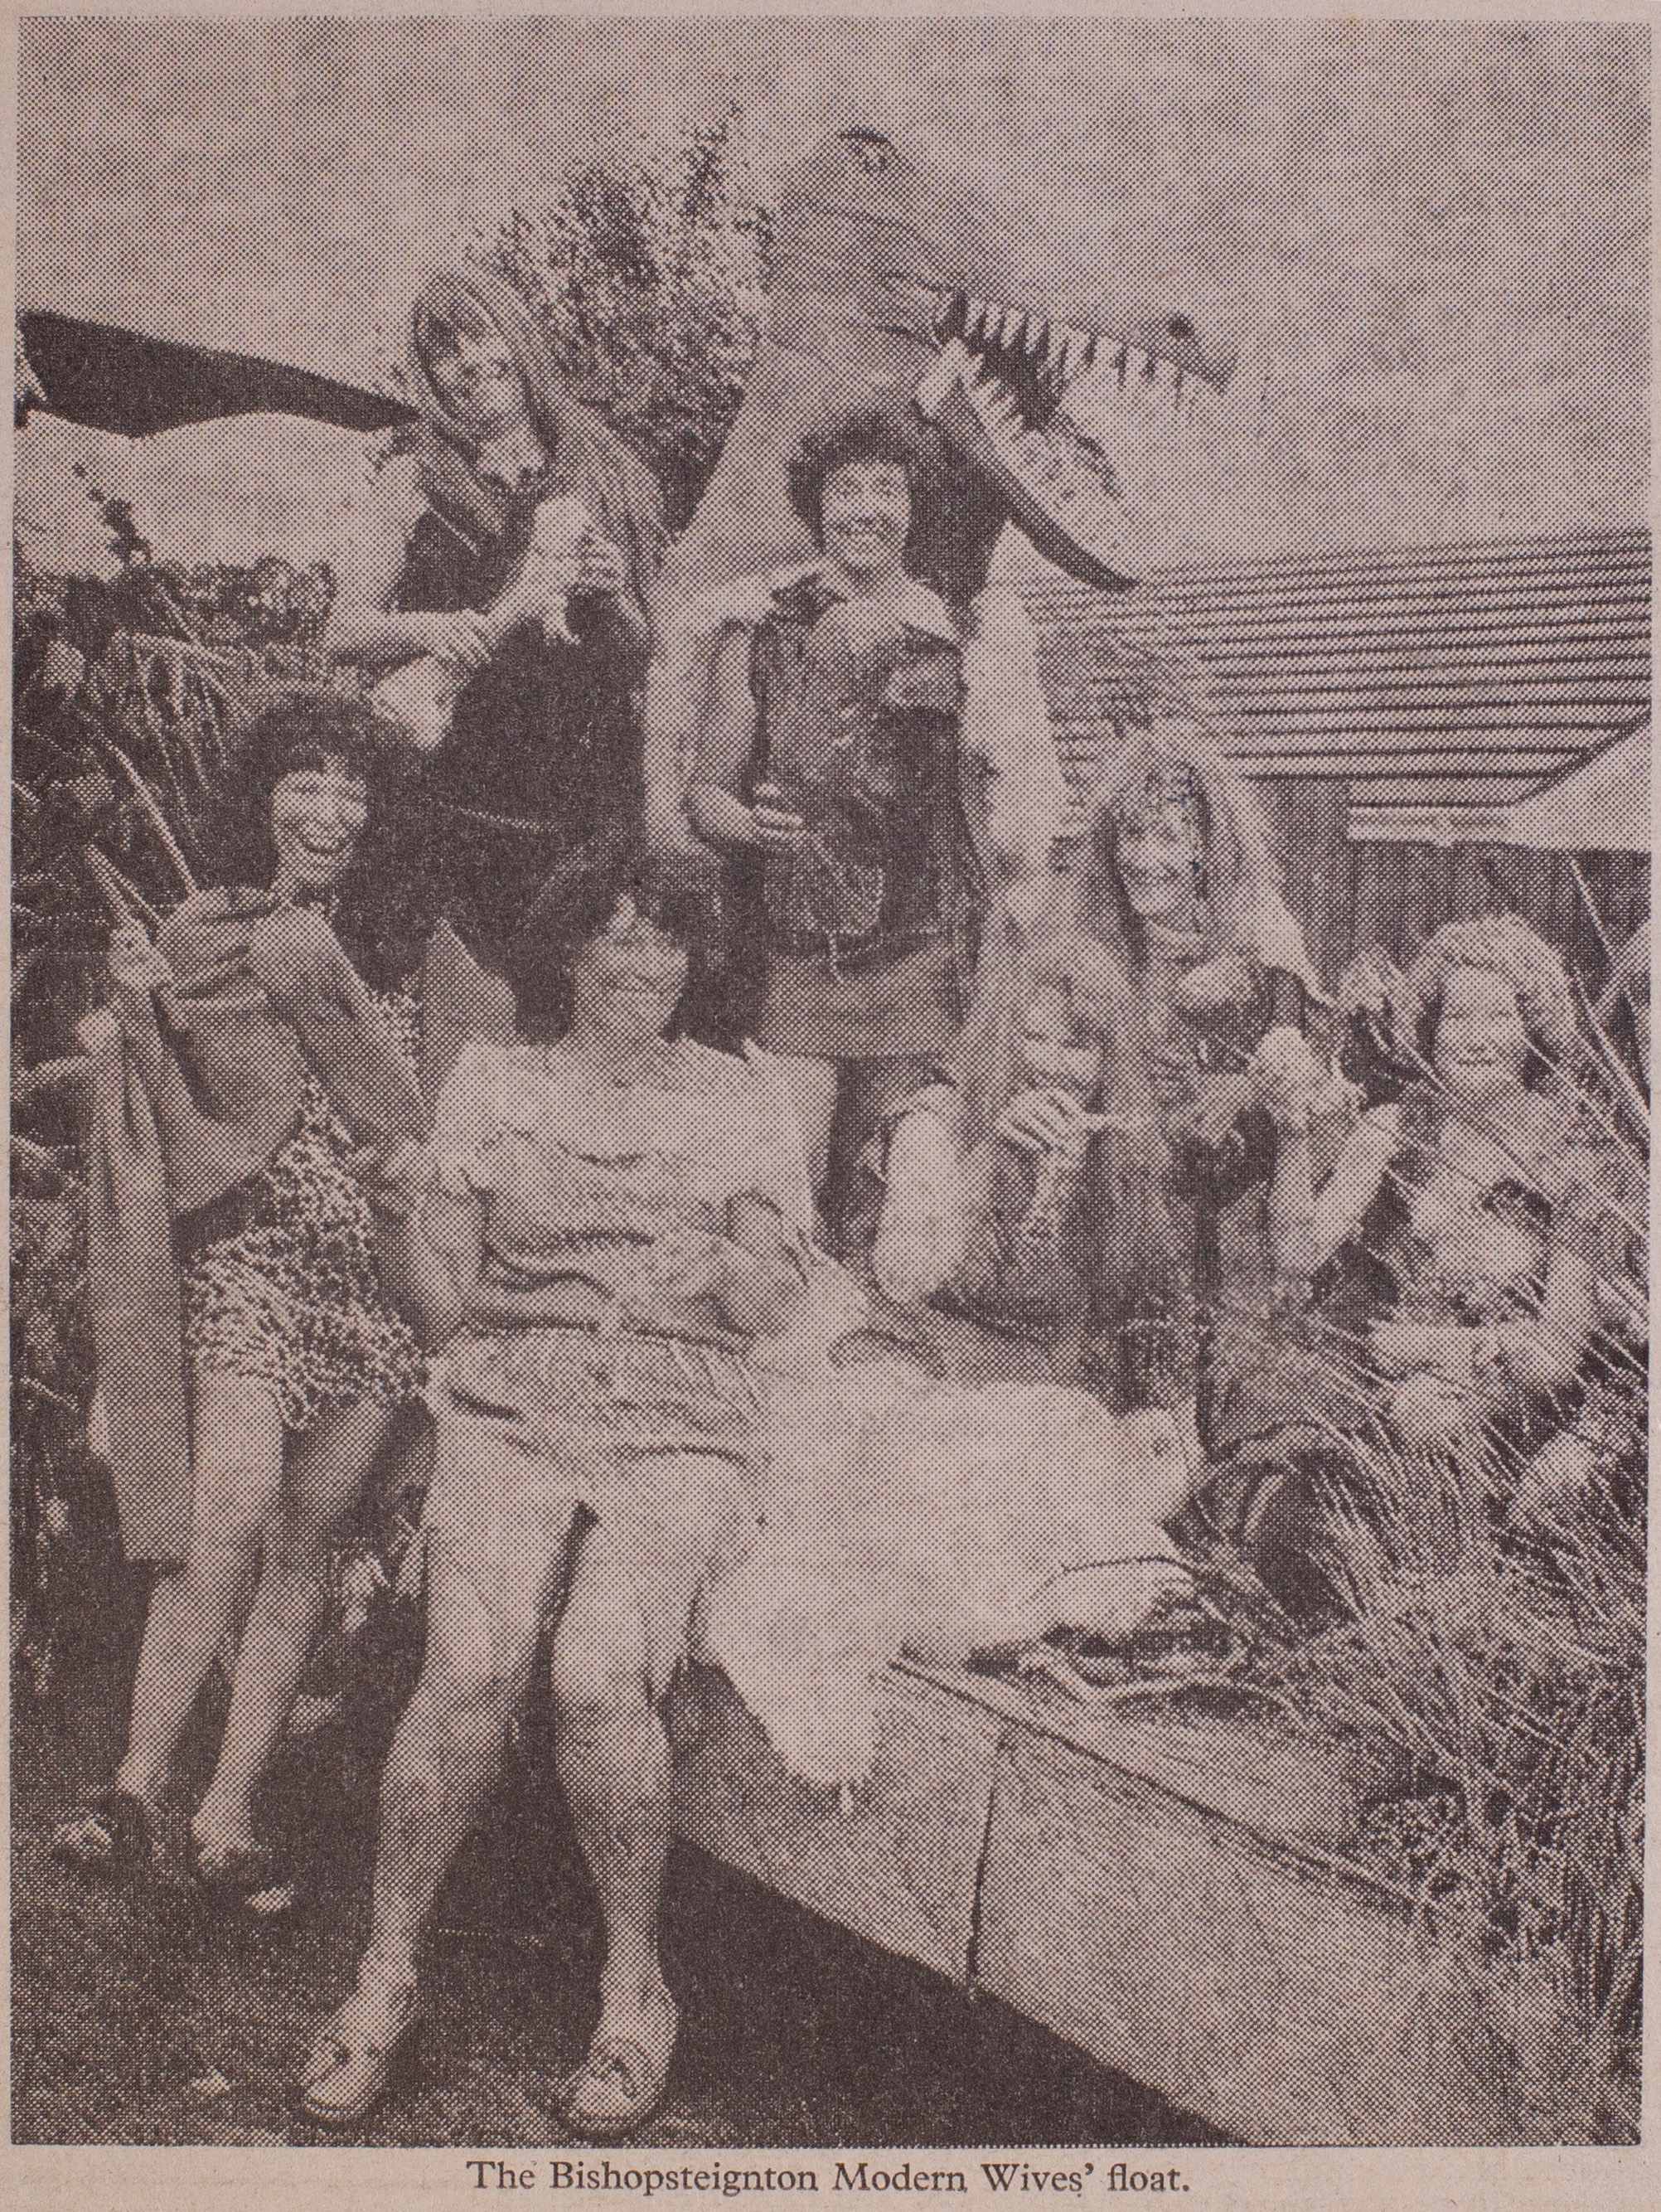 Modern wives festival float 1980 Advertiser newspaper cutting part of 27086